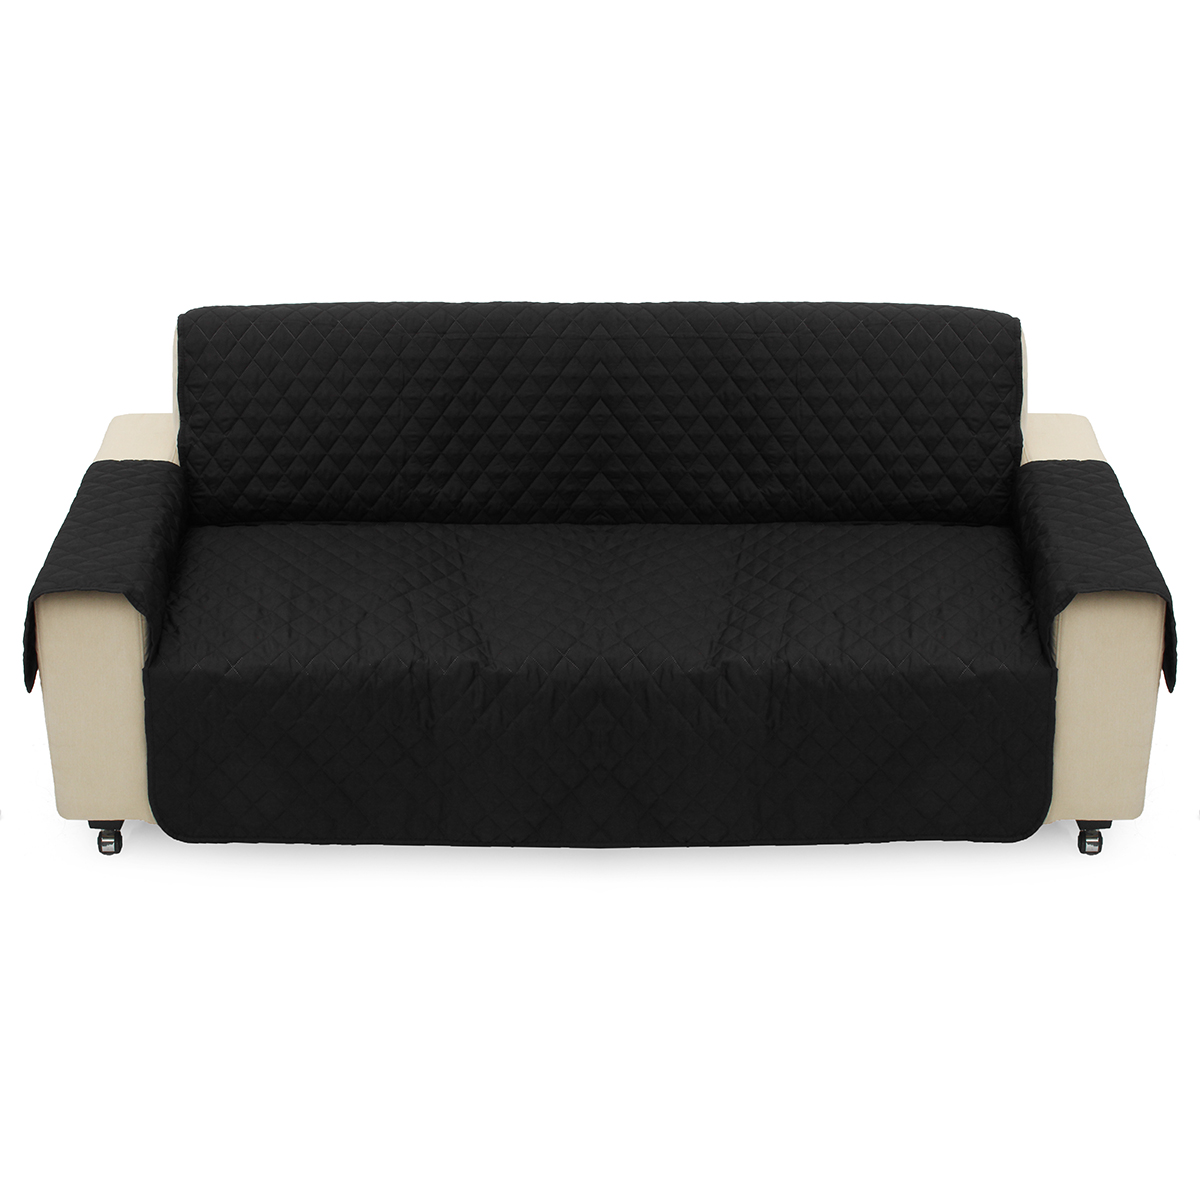 

Black Pet Sofa Couch Protective Cover Pads Removable Strap Waterproof Cat Pad 3 Seater Sofa Mat